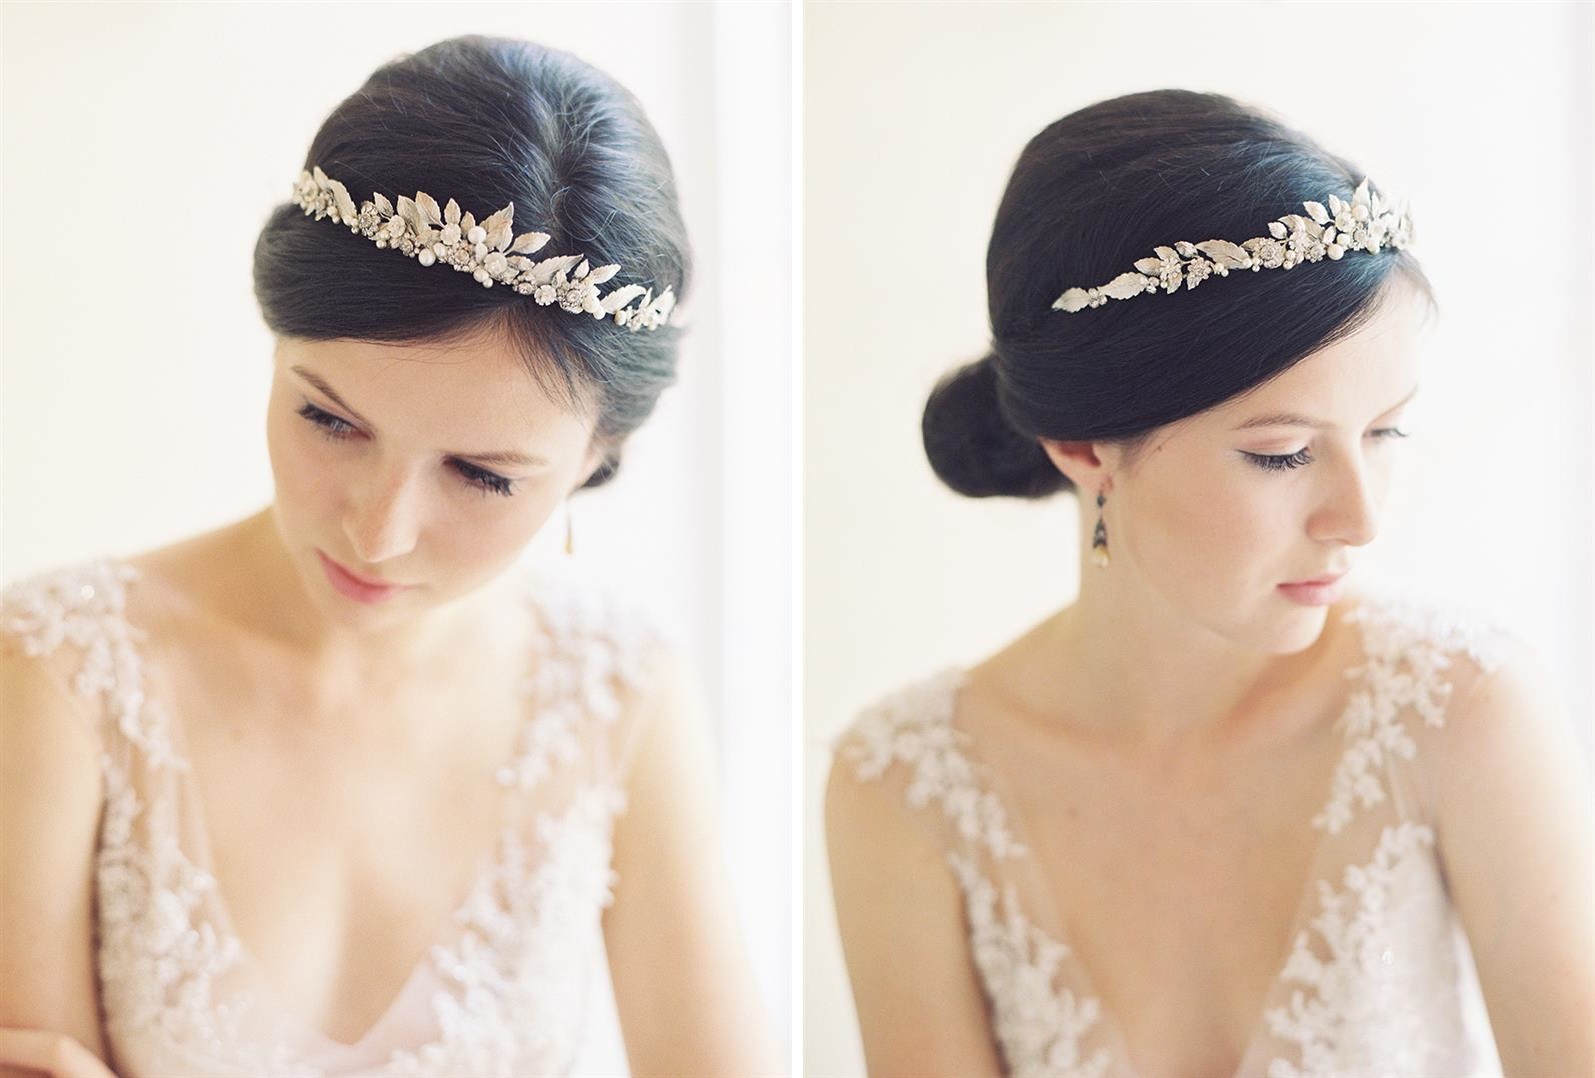 Bridal Crown from Erica Elizabeth Designs English Rose Collection